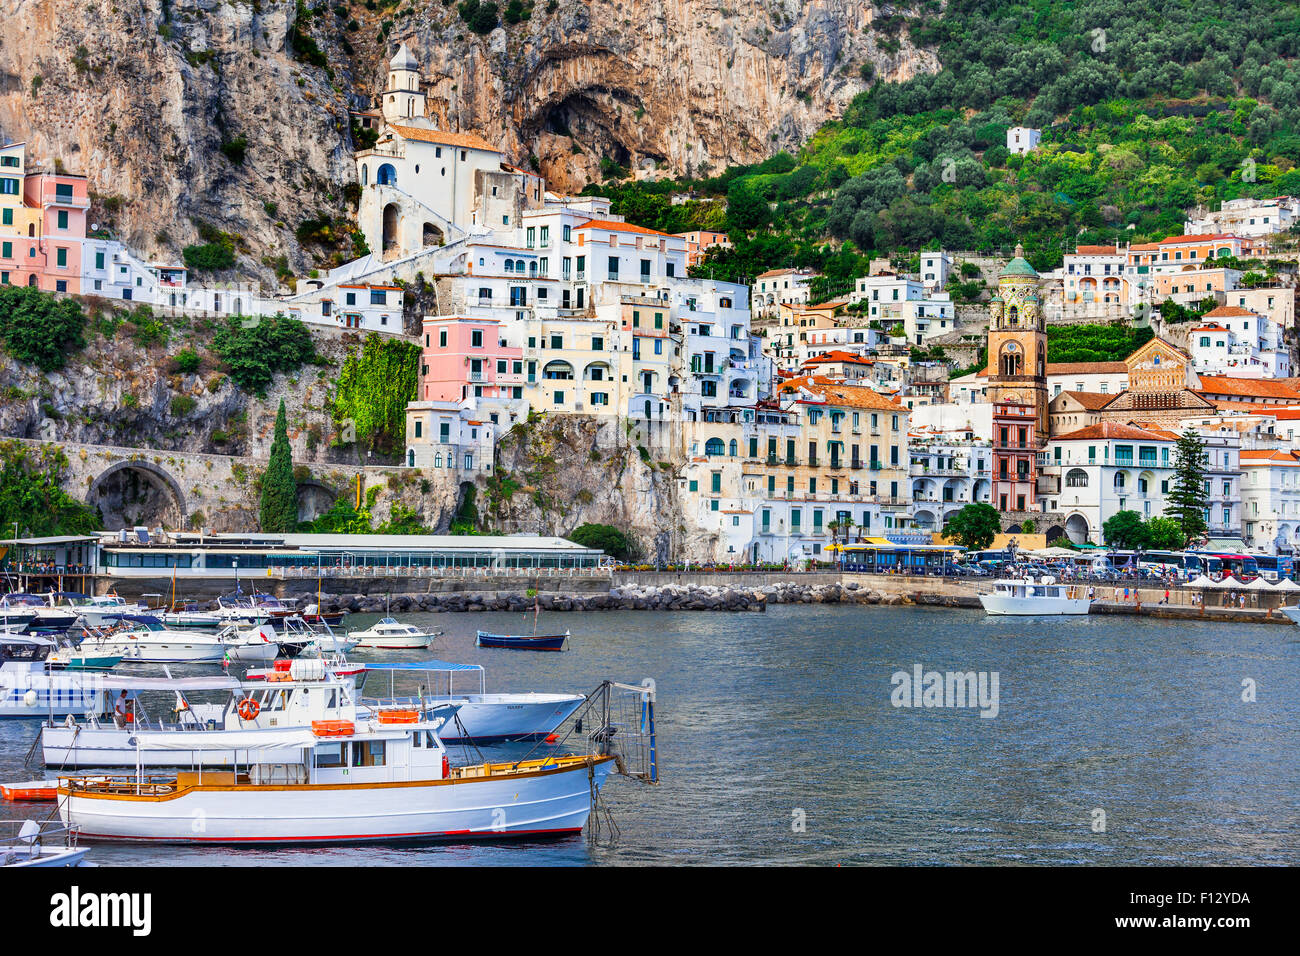 Travel in Italy -  pictorial Amalfi Stock Photo